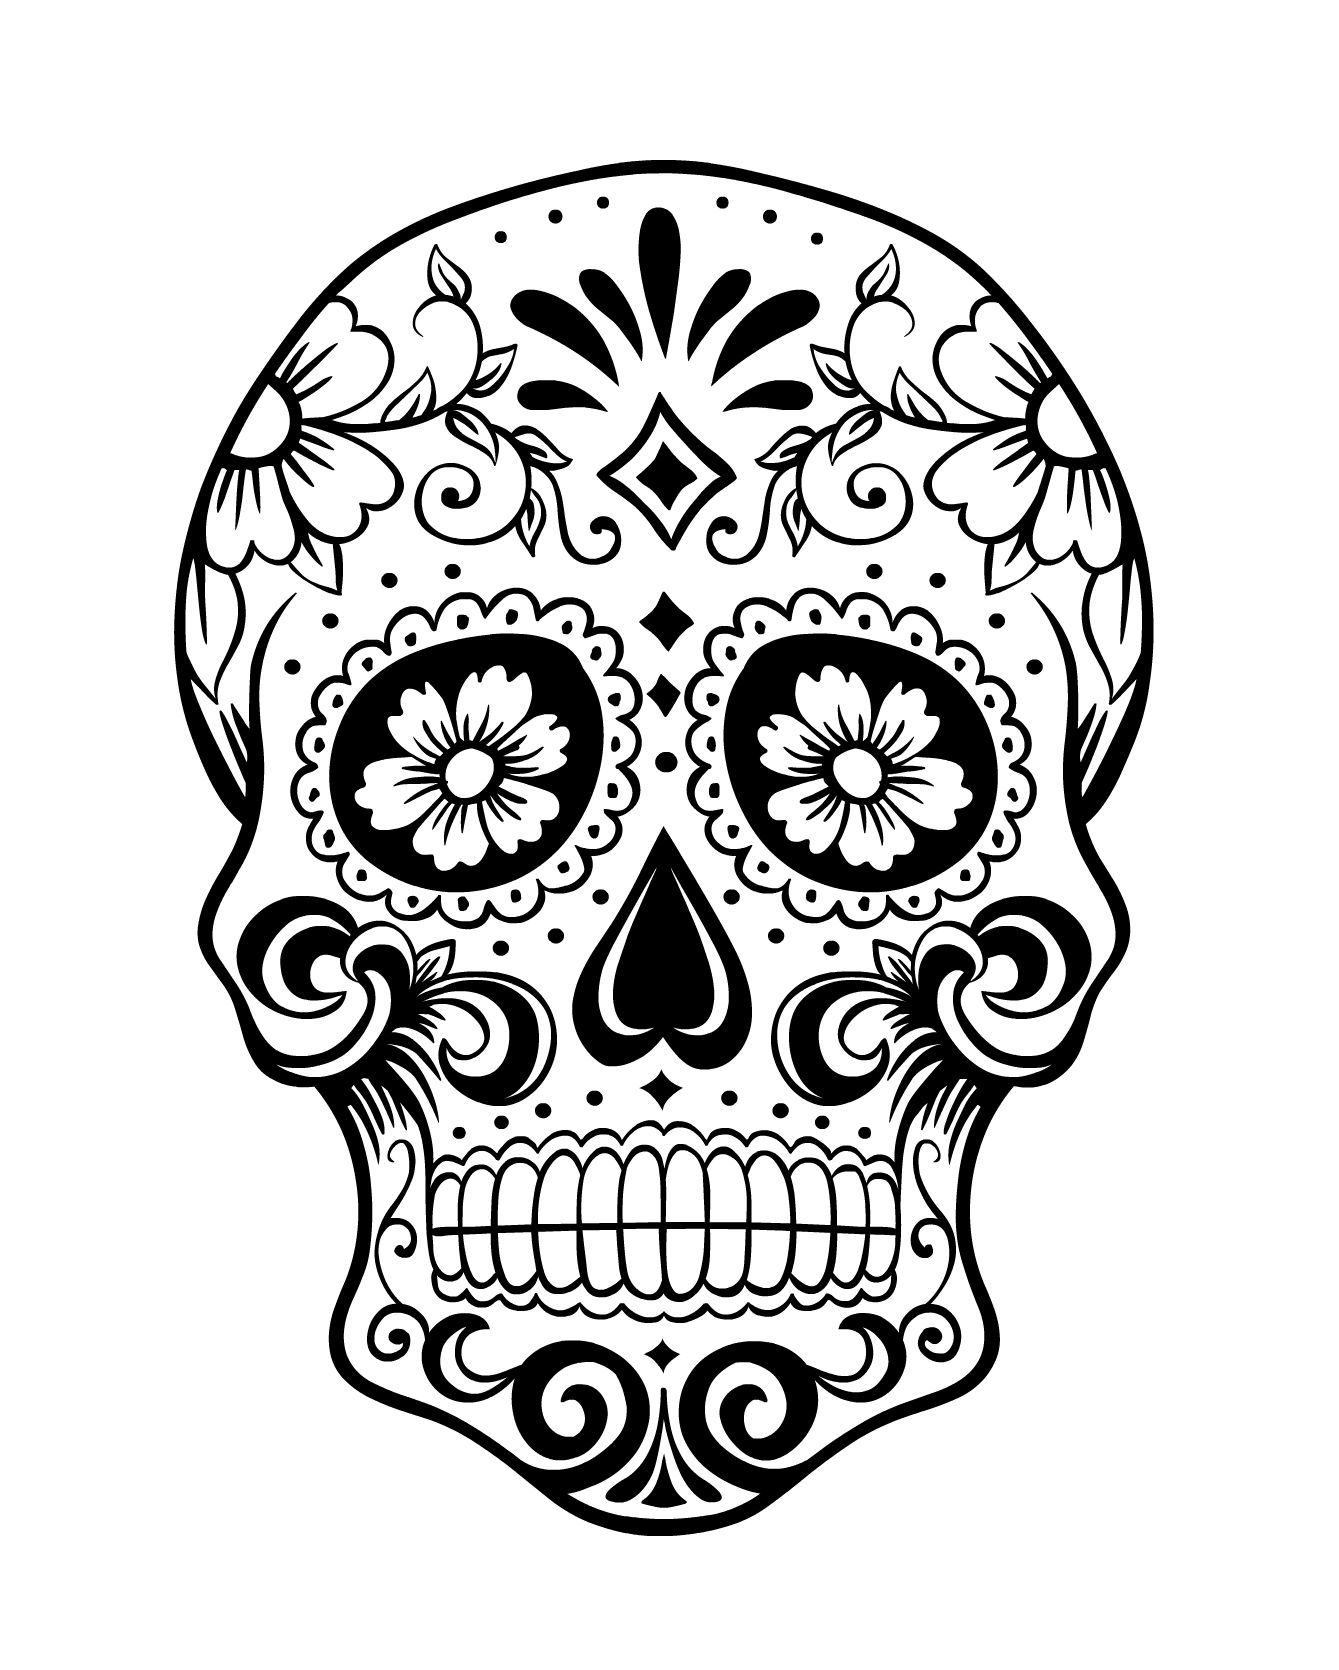 Coloring Pages : Day Of The Coloring Pages Free Sugar Skull Page - Free Printable Sugar Skull Coloring Pages